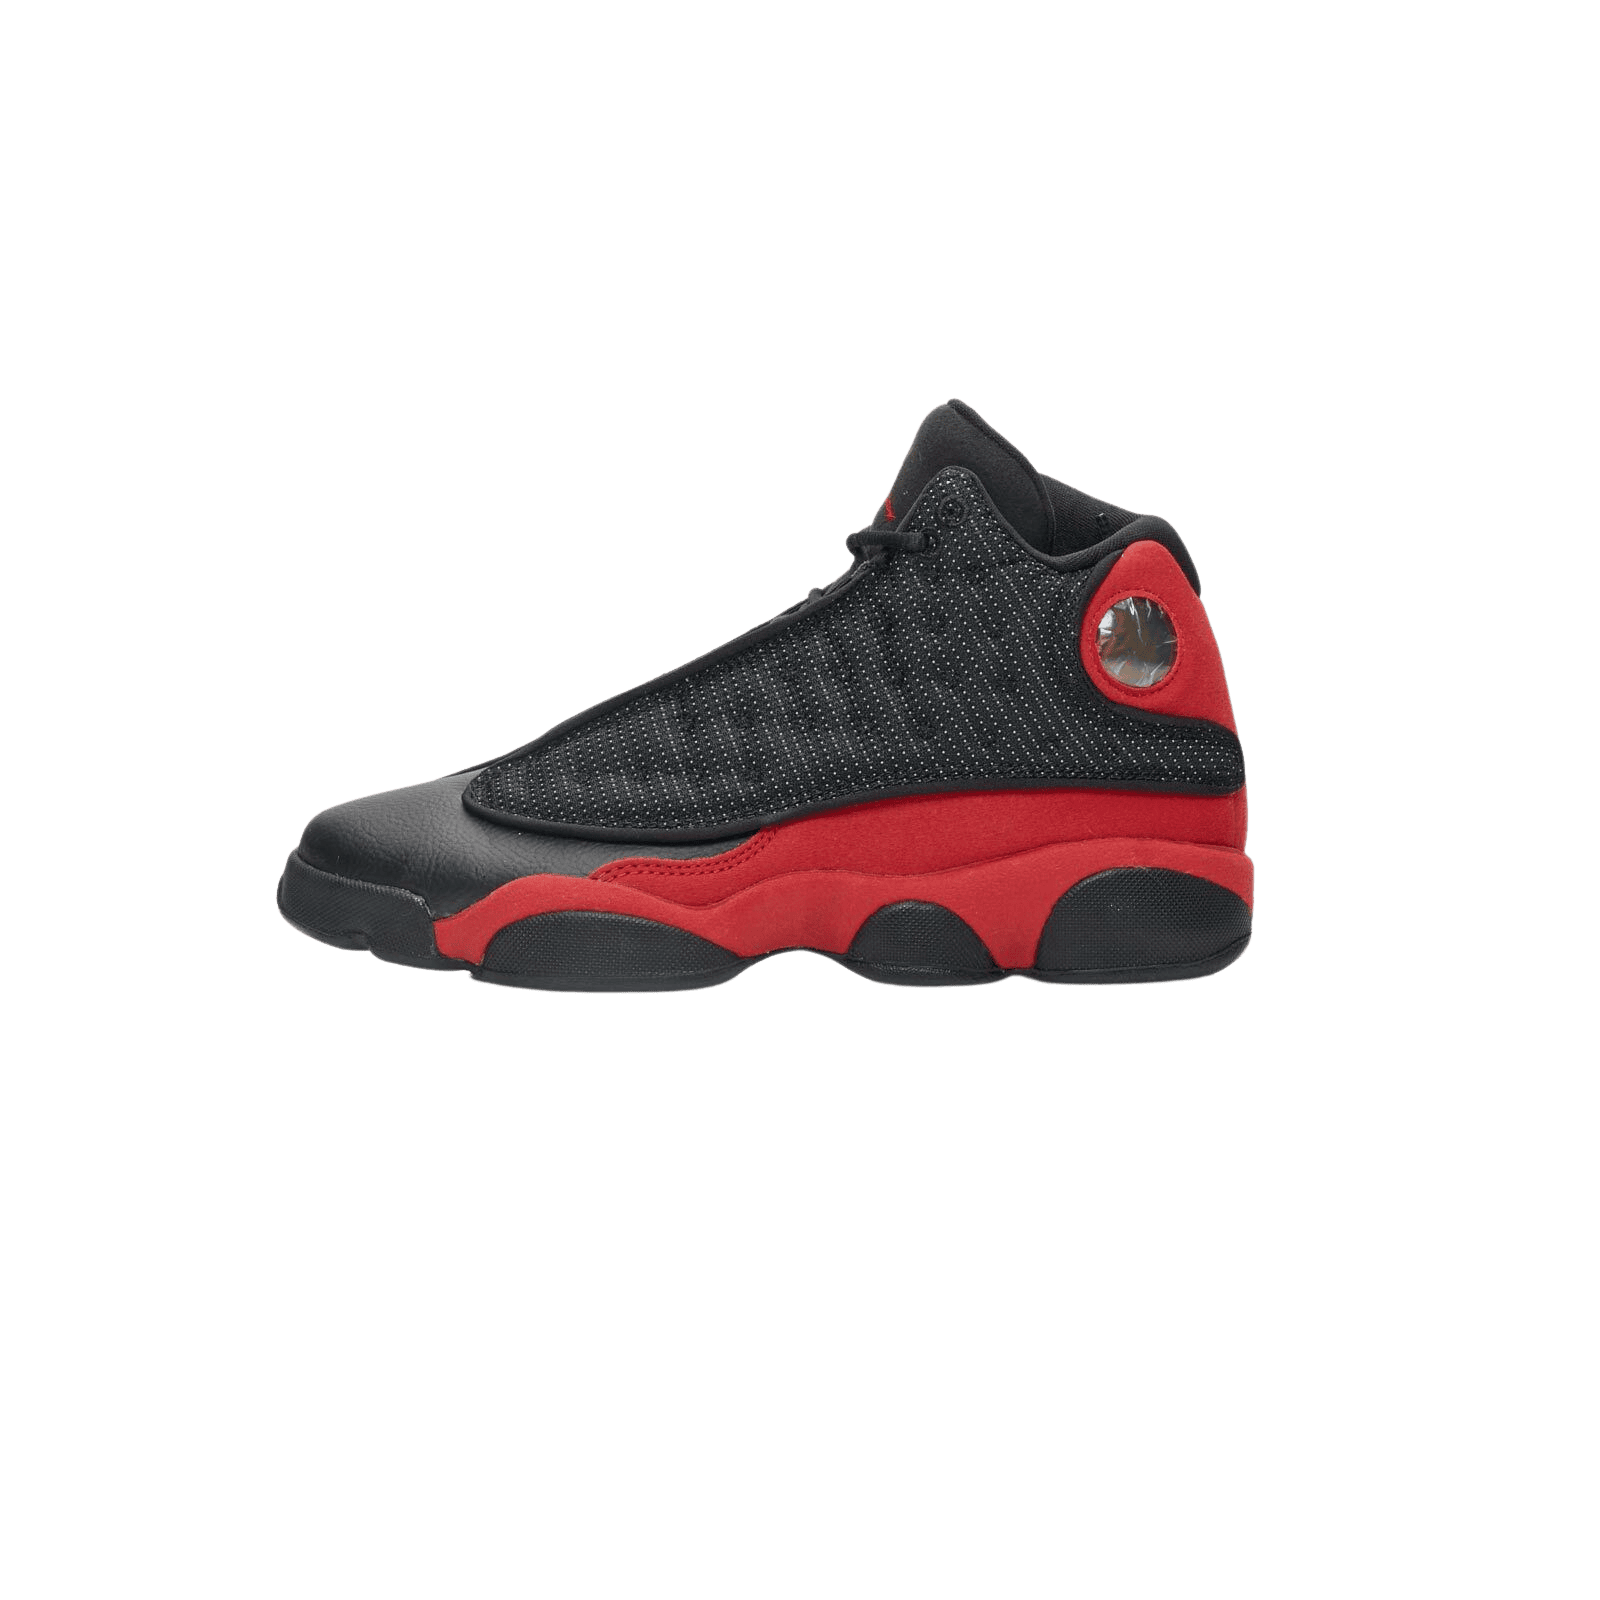 Black and Red Jordan Retro 13 Features and History | eBay